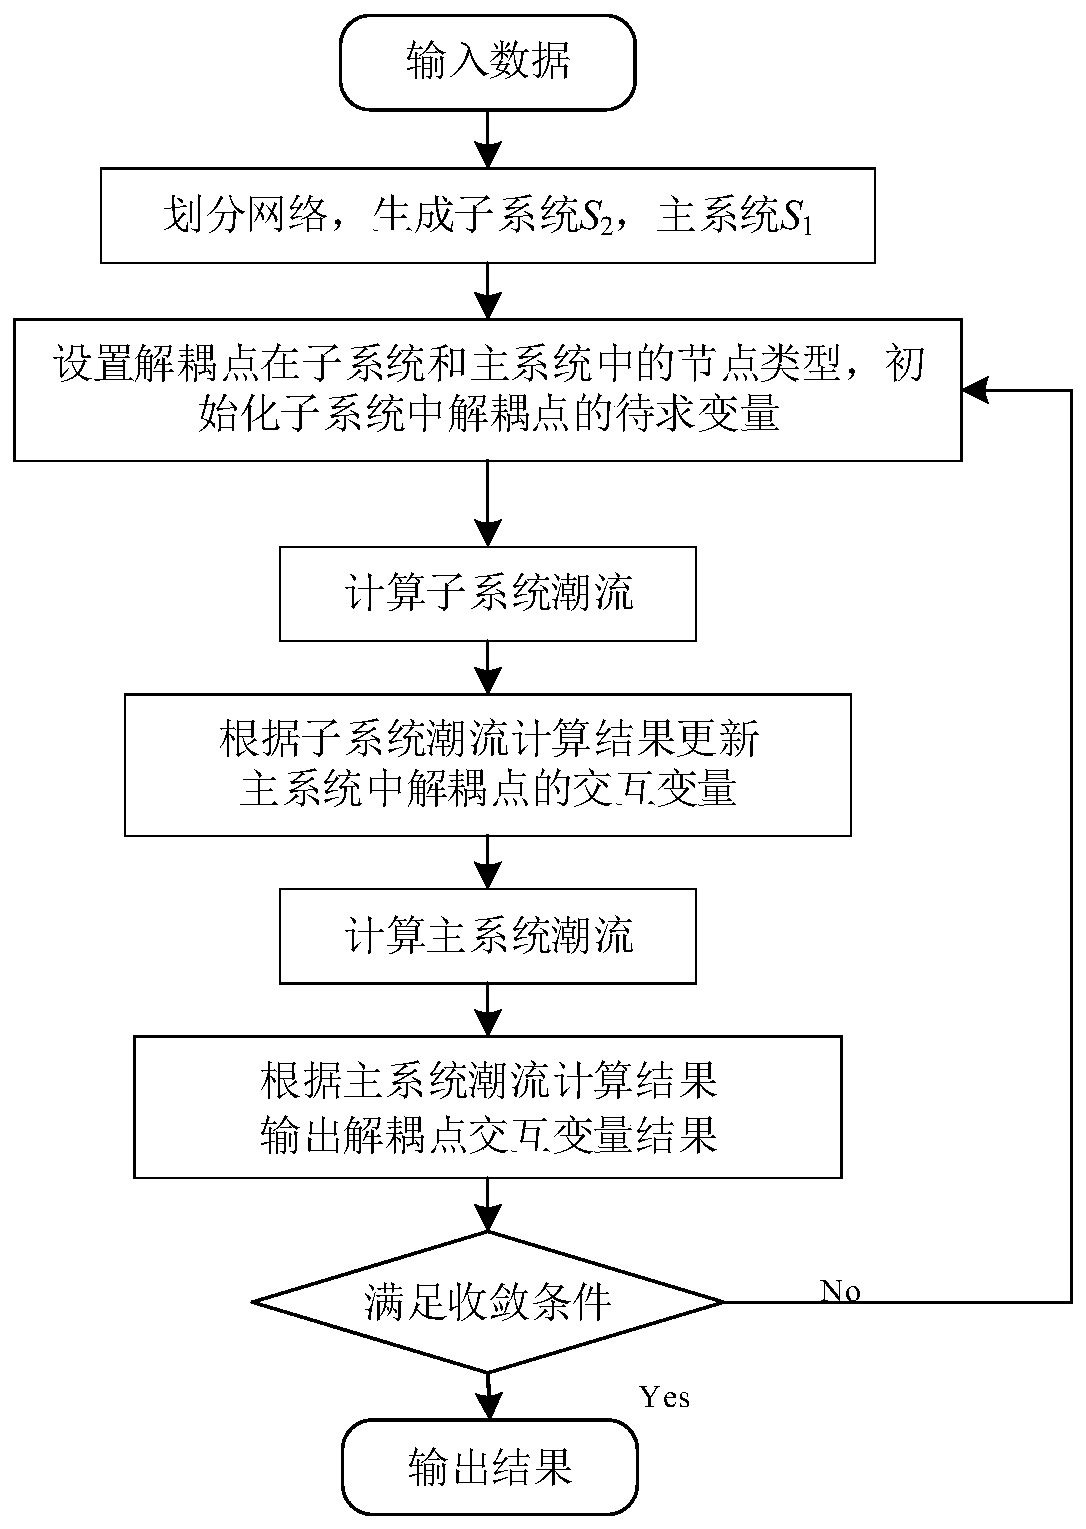 Thermodynamic system static load flow rapid decoupling calculation method for quantity adjustment